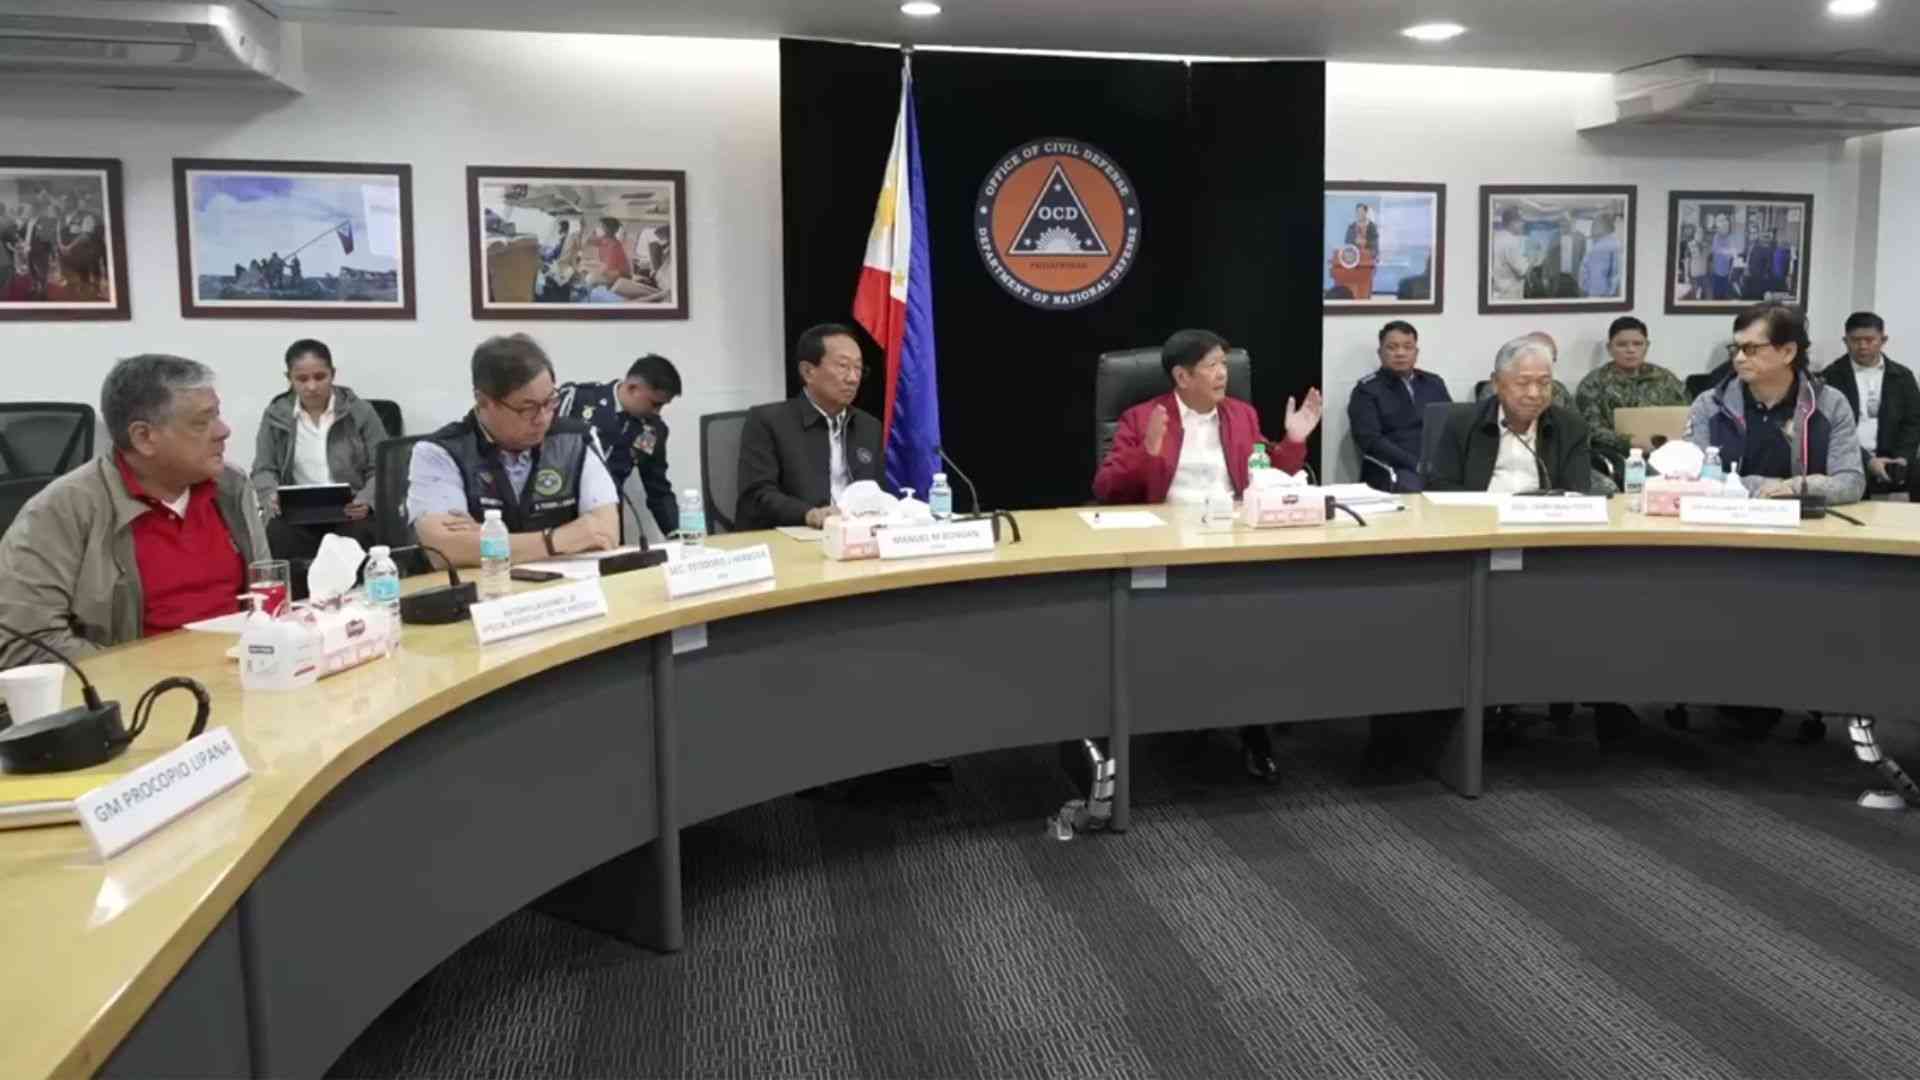 PBBM, NDRRMC conducts situation briefing on Typhoon Carina, habagat